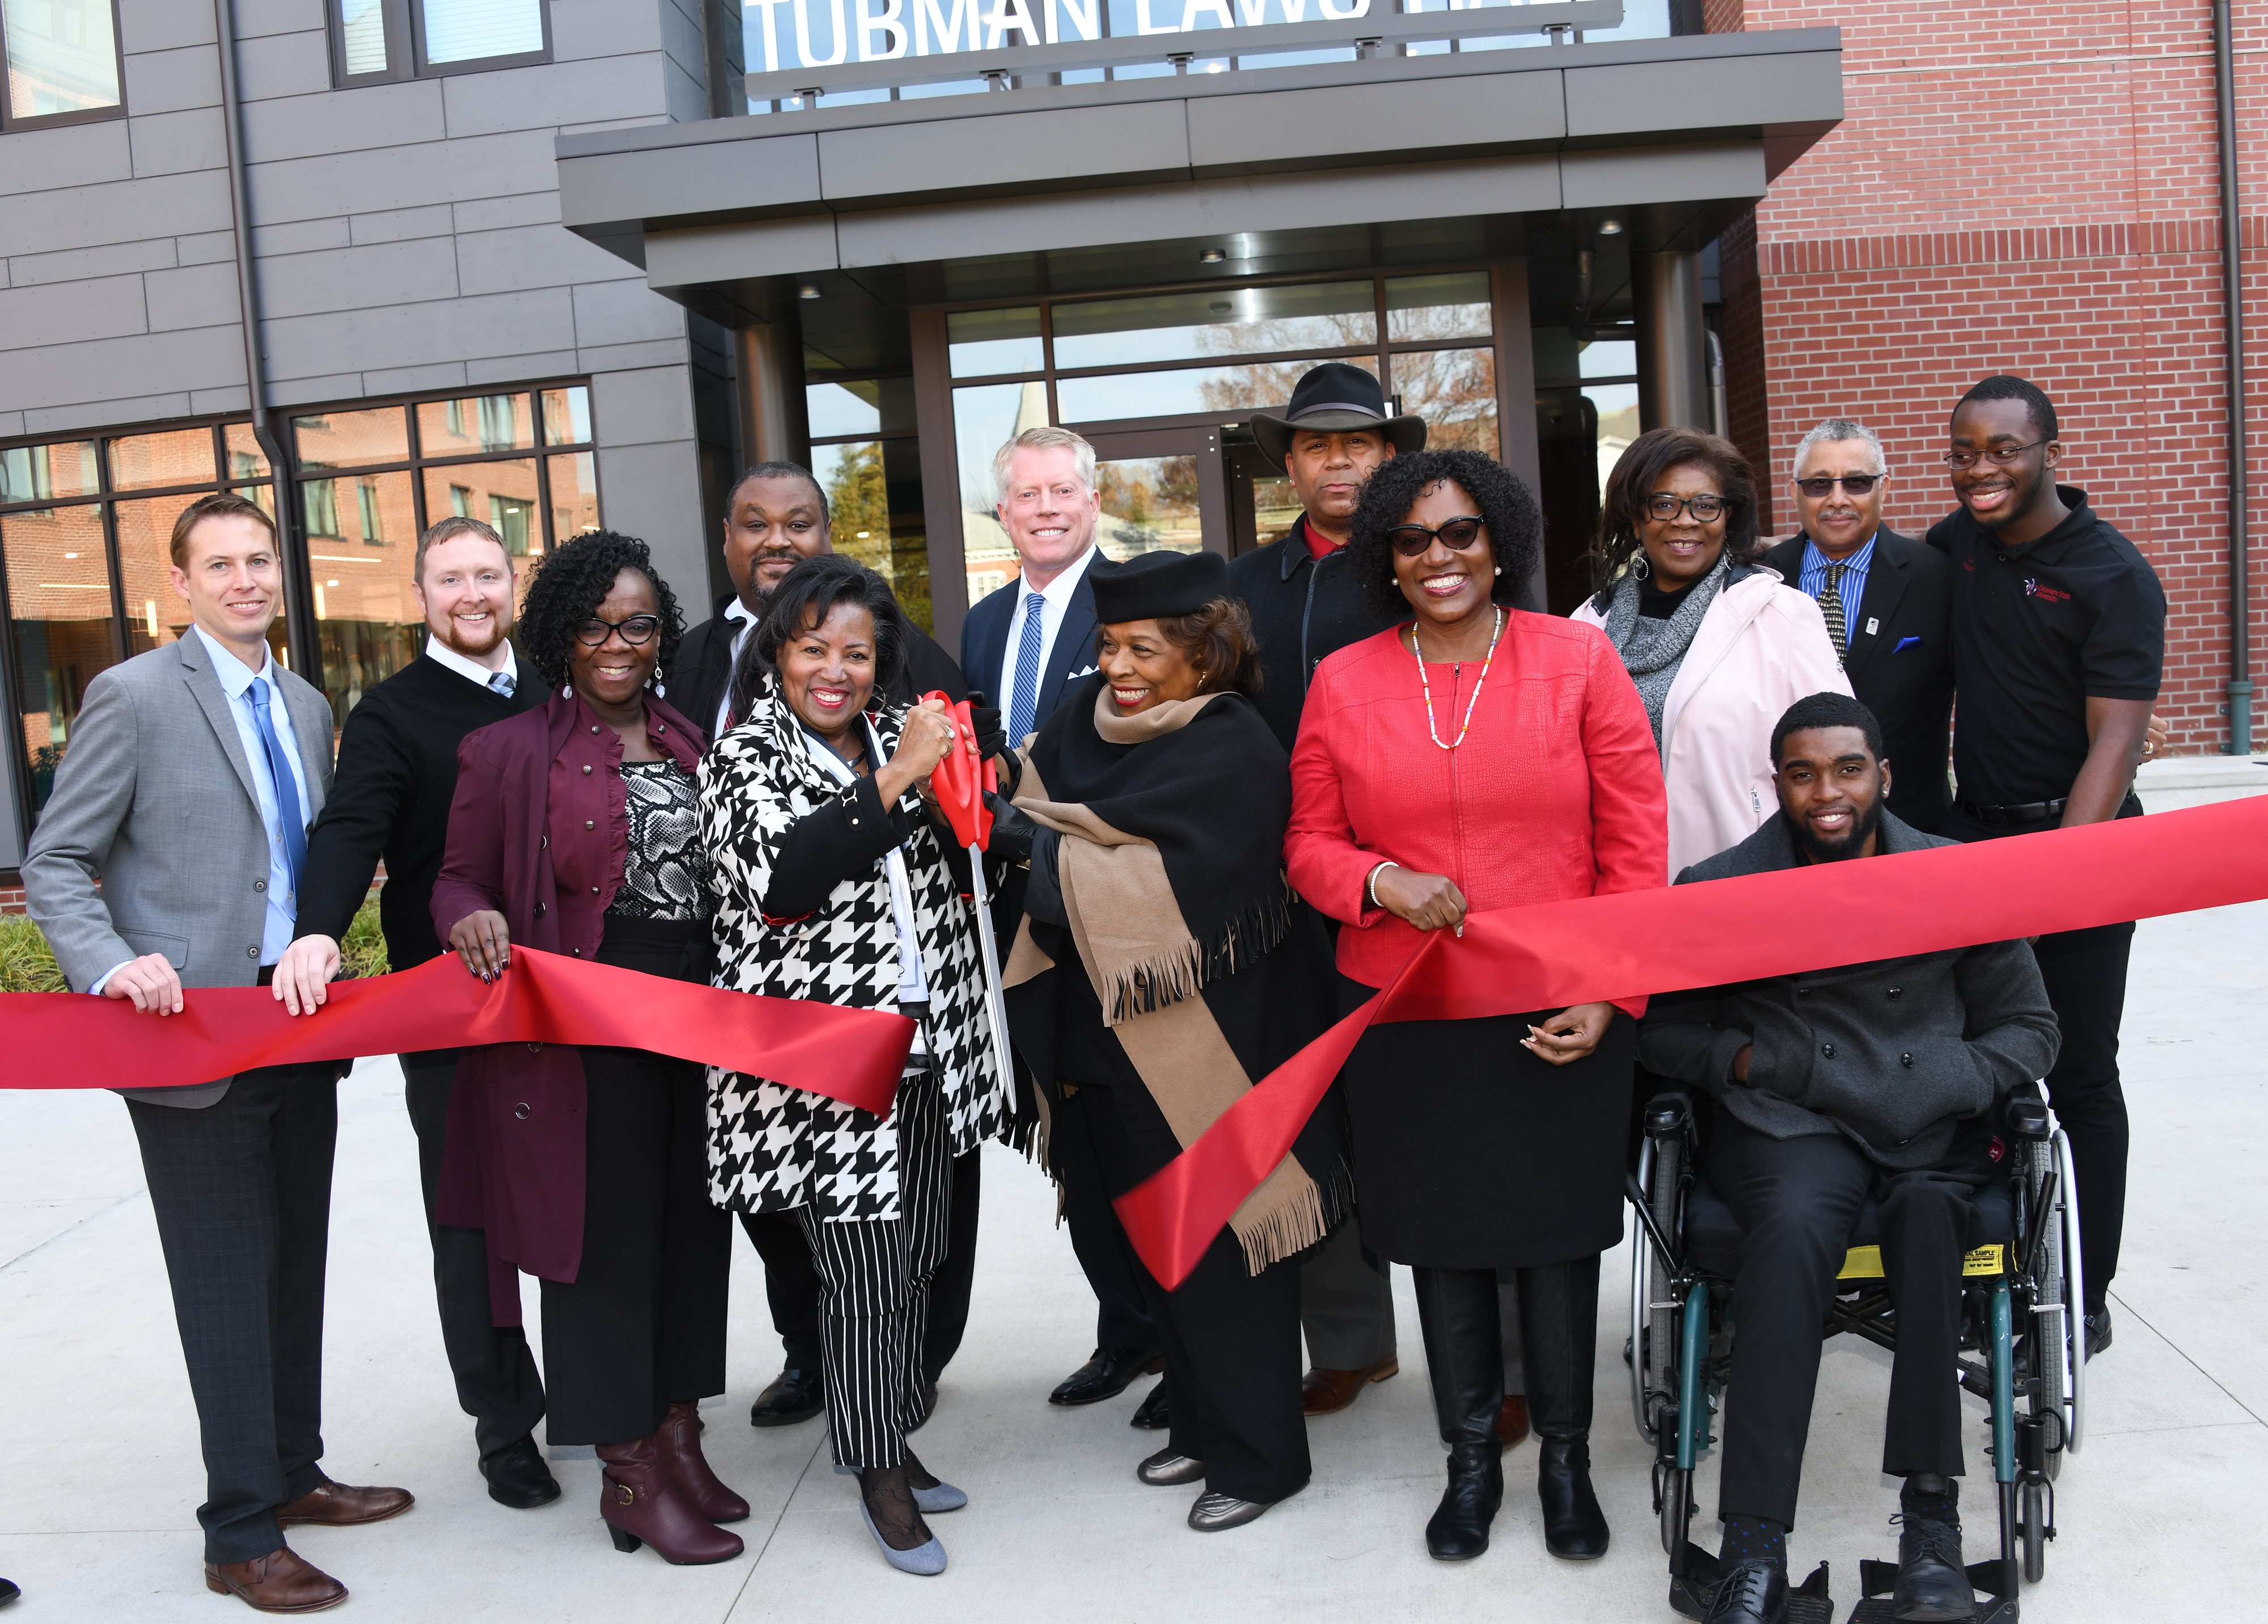 Dr. Devona Williams (with scissors) and University President Wilma Mishoe and others take part in the ribbon-cutting ceremony to formally christen the new Tubman-Laws Residential Hall.